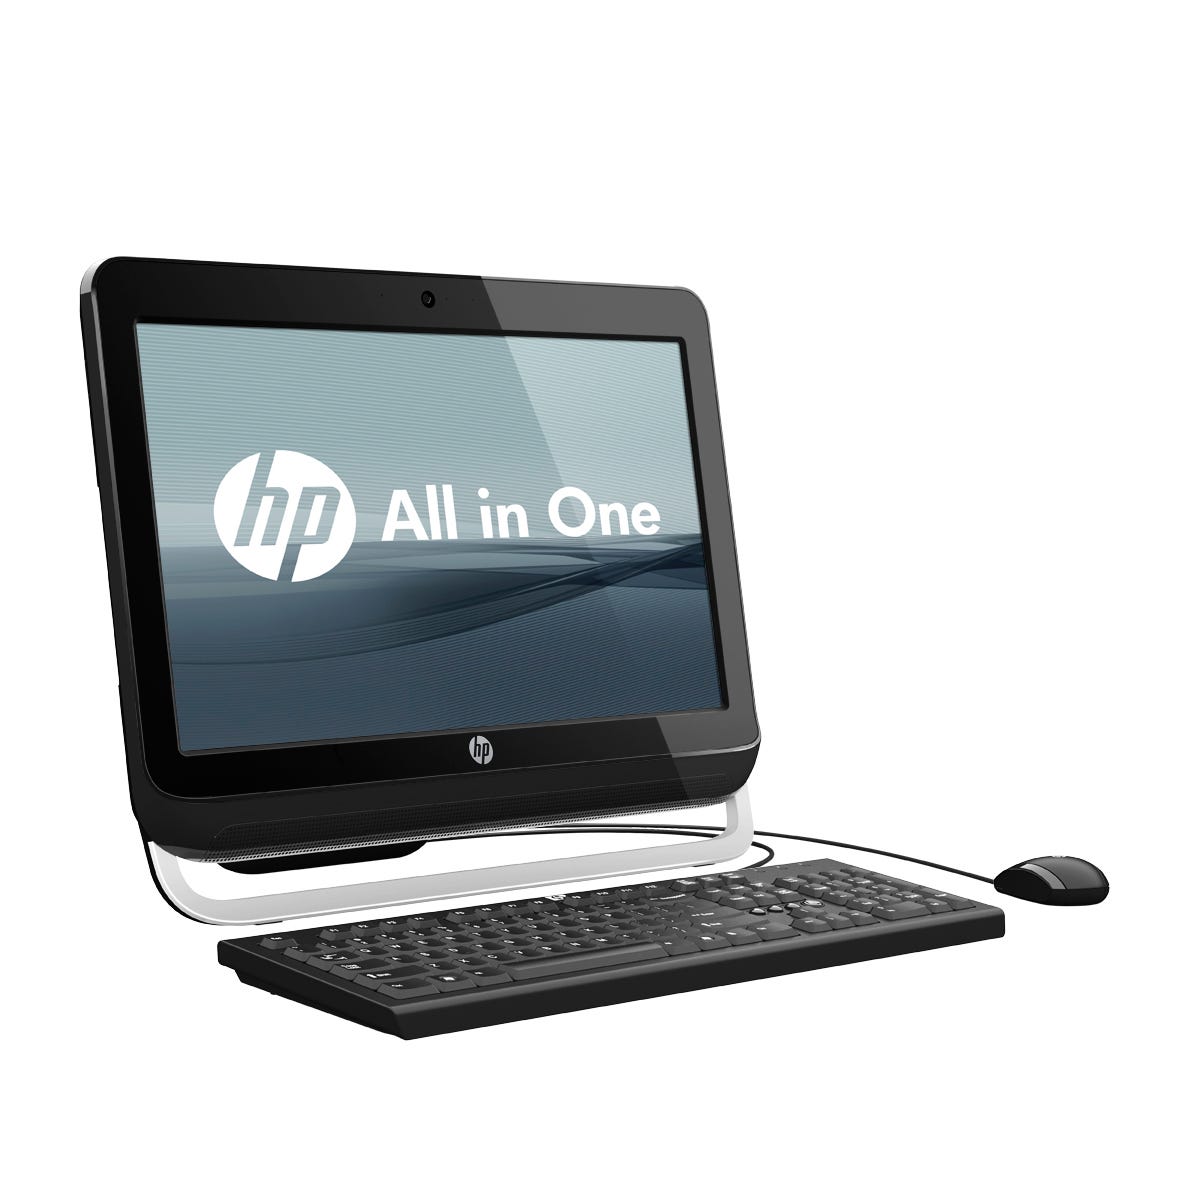 HP_Pro_3420_AIO_Business_PC_Front_Right_View.jpg